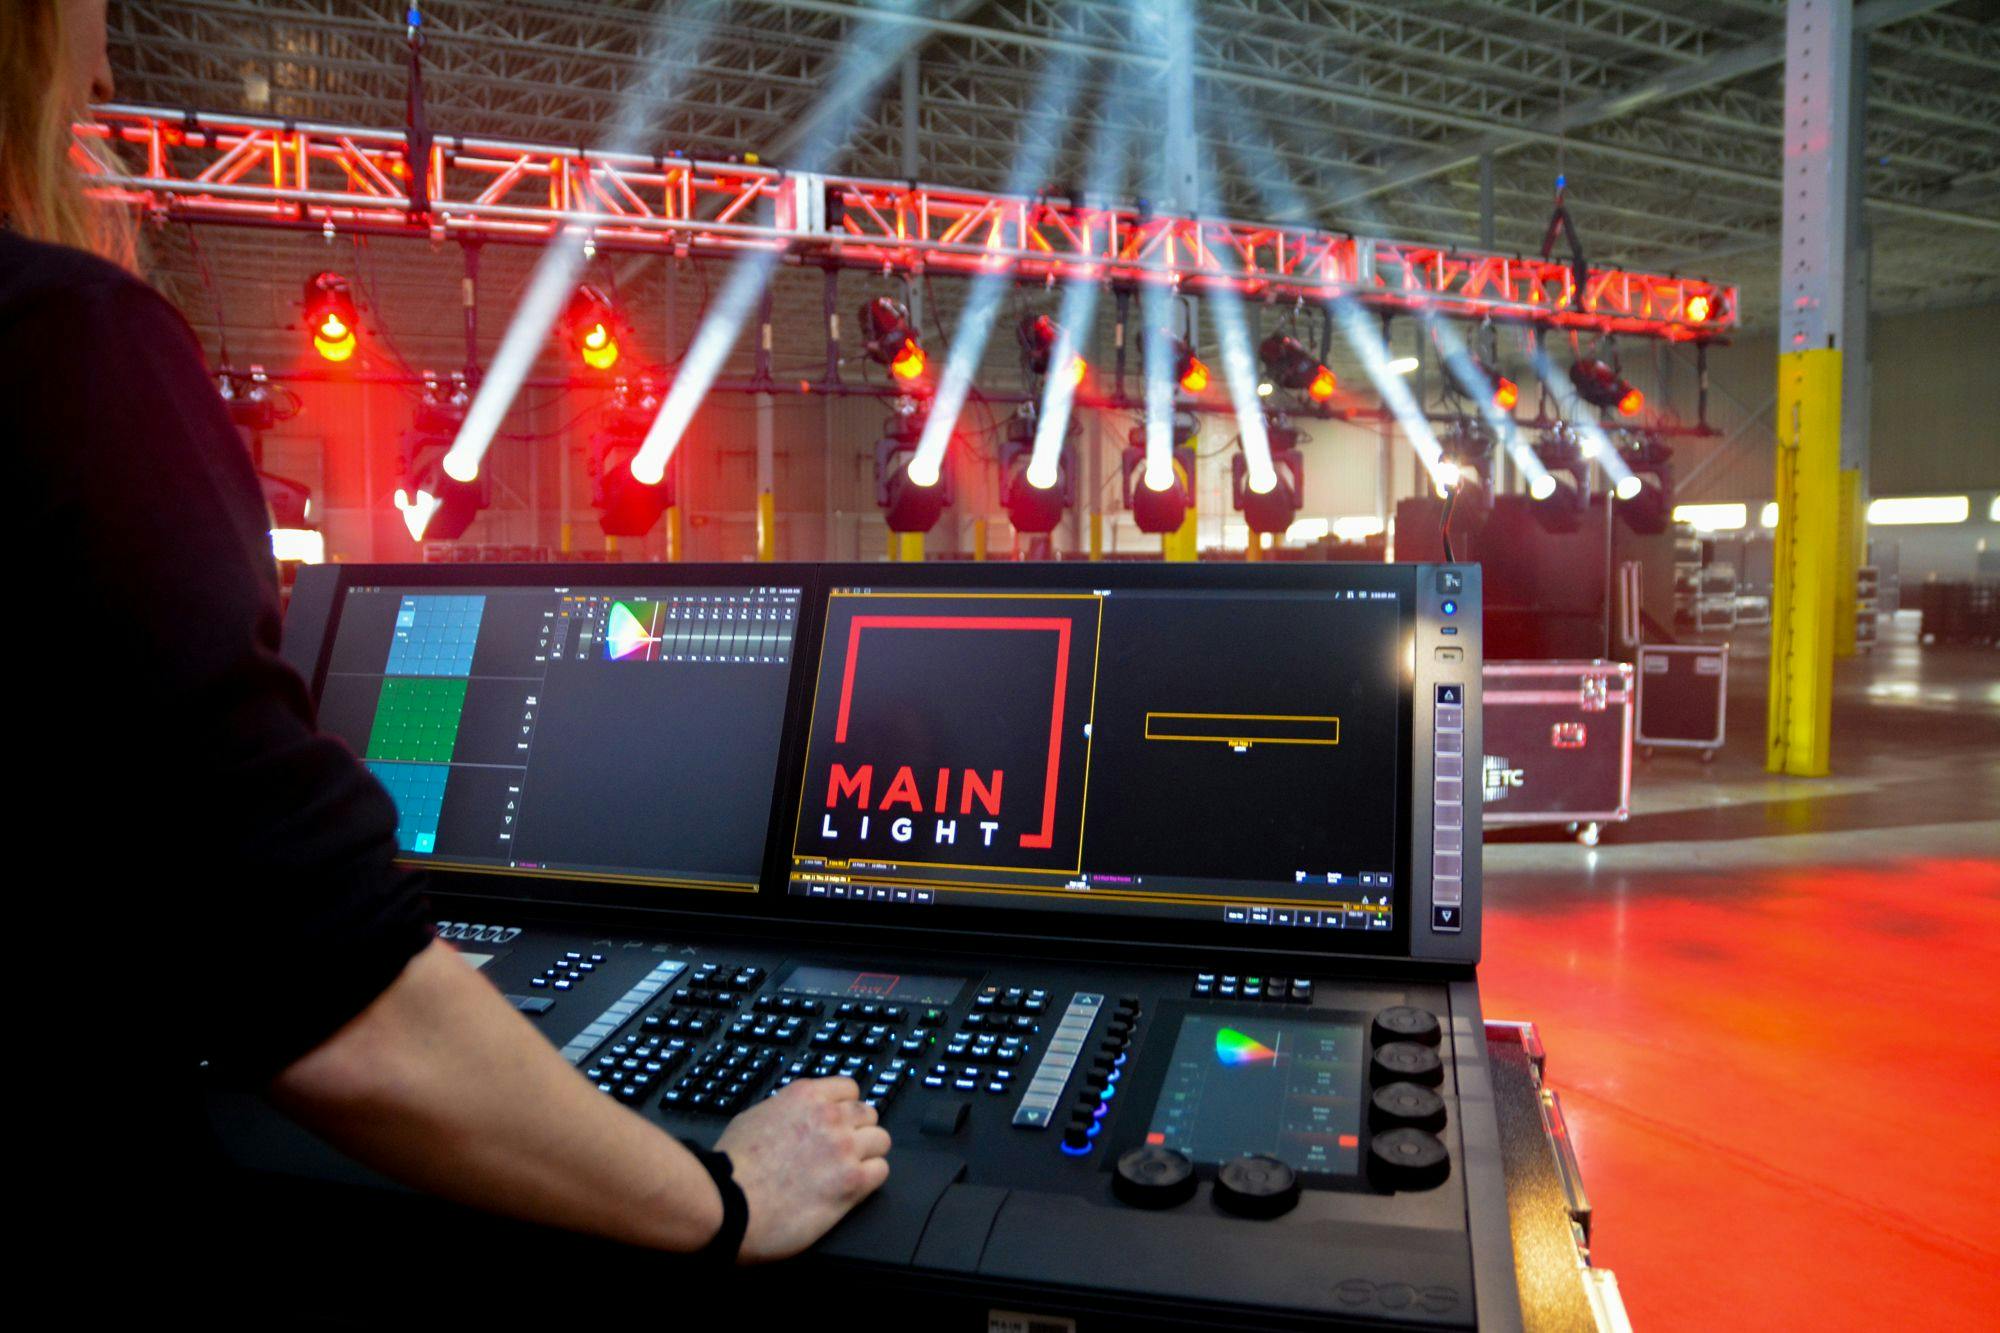 ETC EOS Apex 10 being used to program ETC Lonestars on a rack of truss. The Main Light logo is visible on the Apex 10 screen.